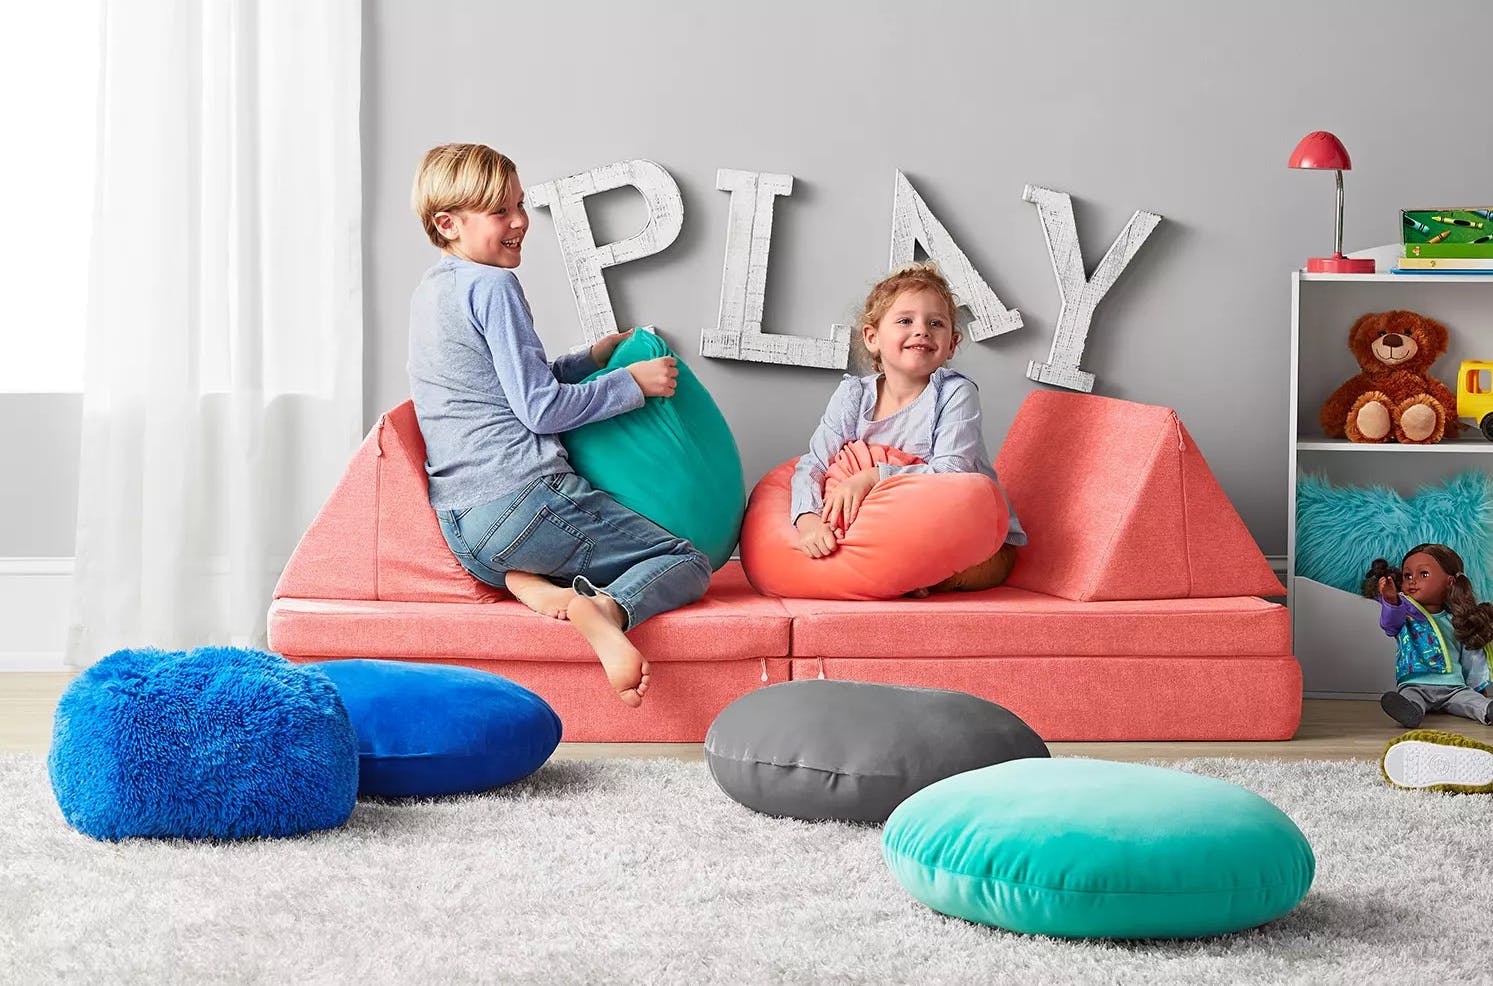 New at Sam's Club The Nugget Play Couch Dupe Cover Sets The Krazy